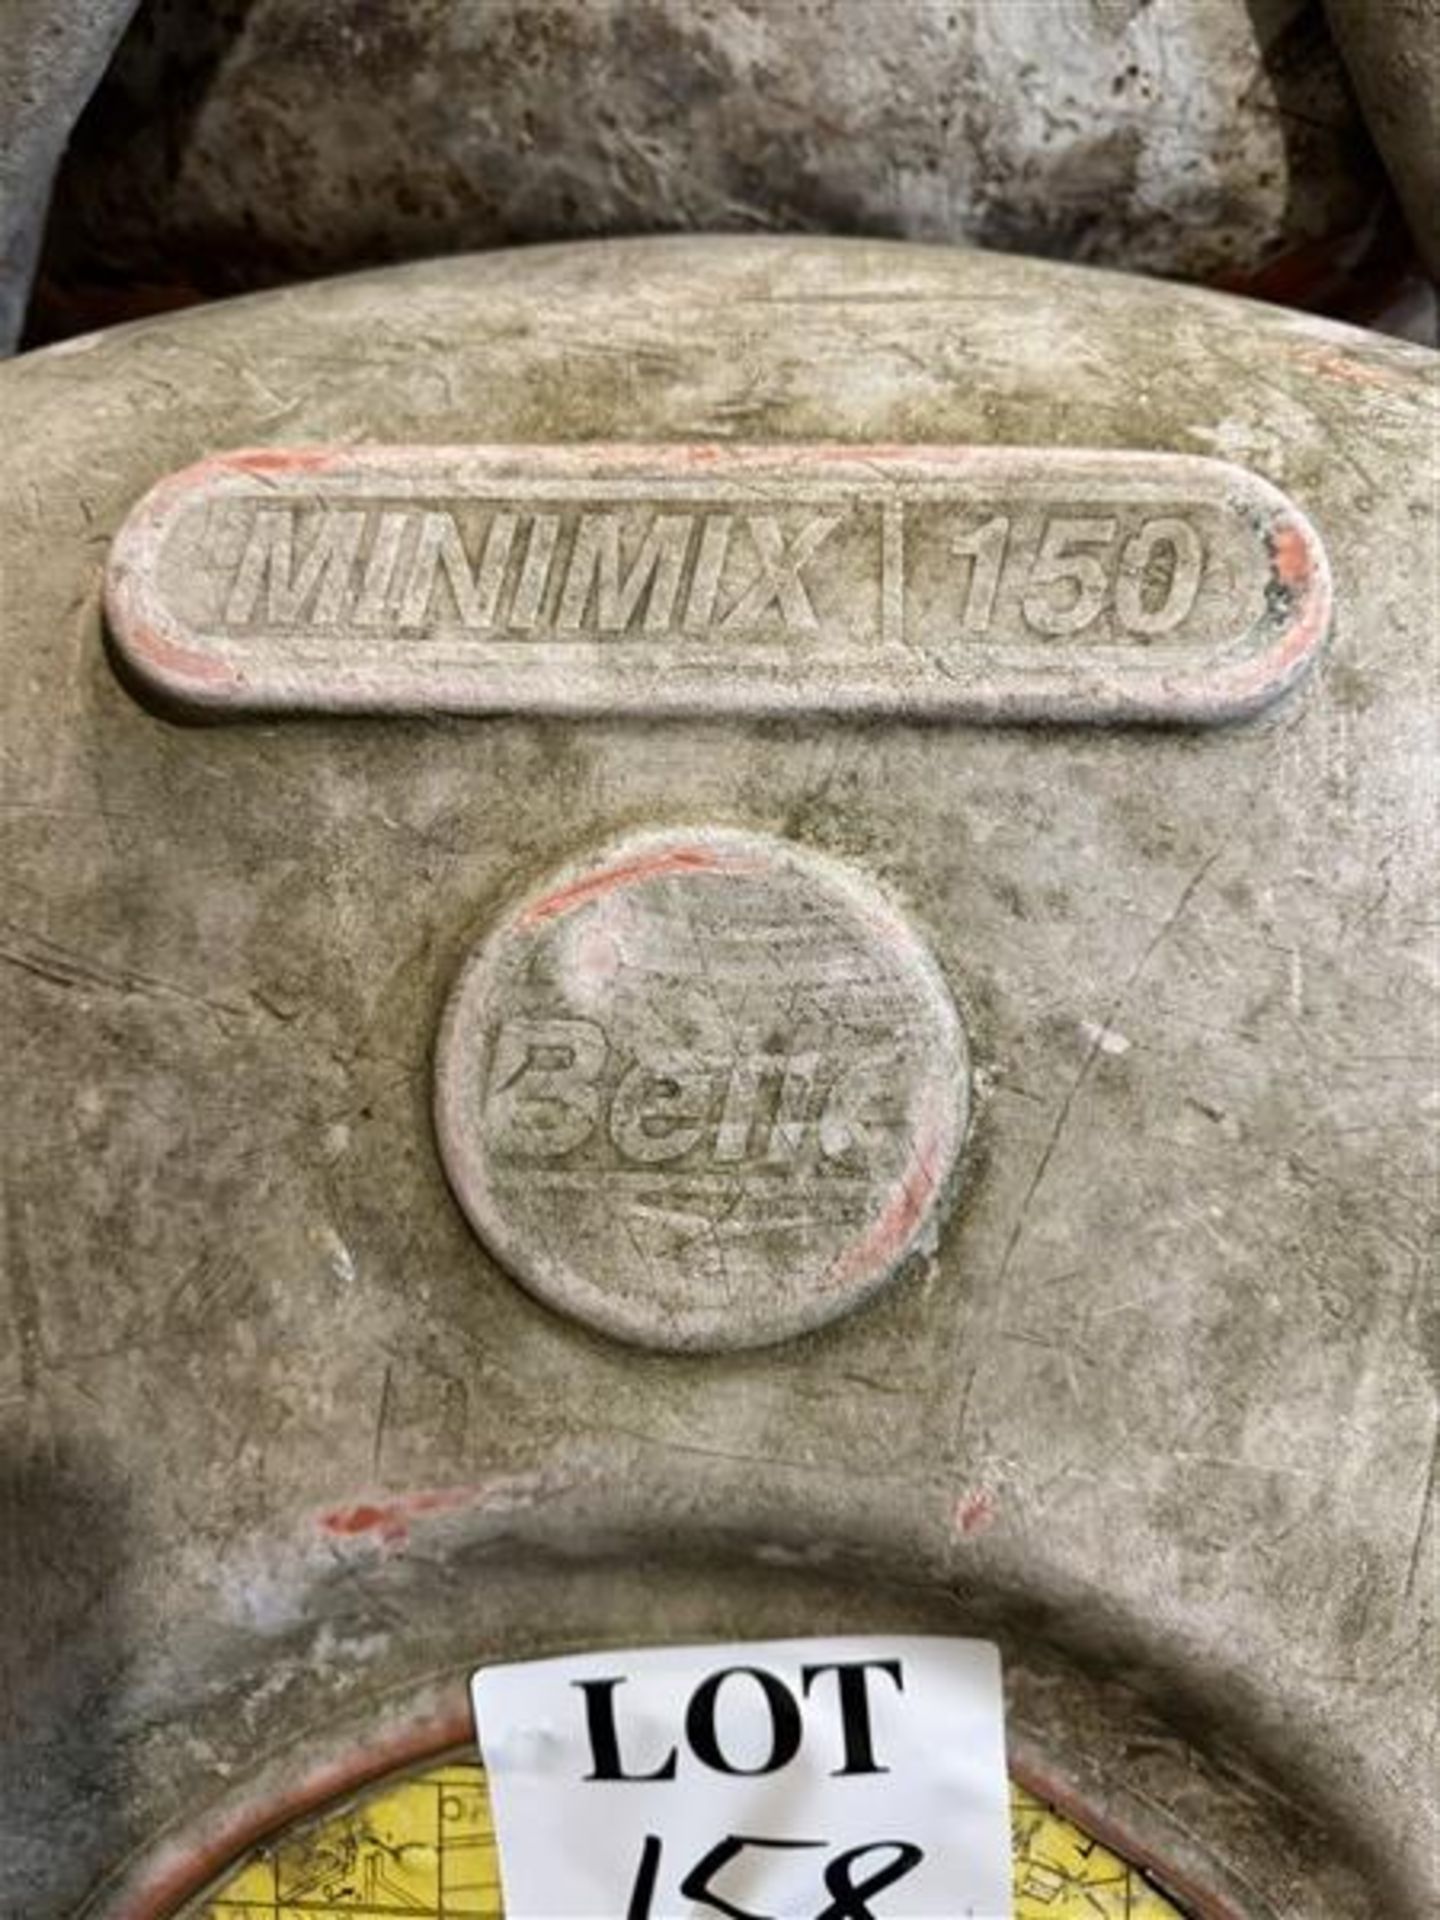 Two Belle Minimix 150 cement mixers, 240v - Image 4 of 5